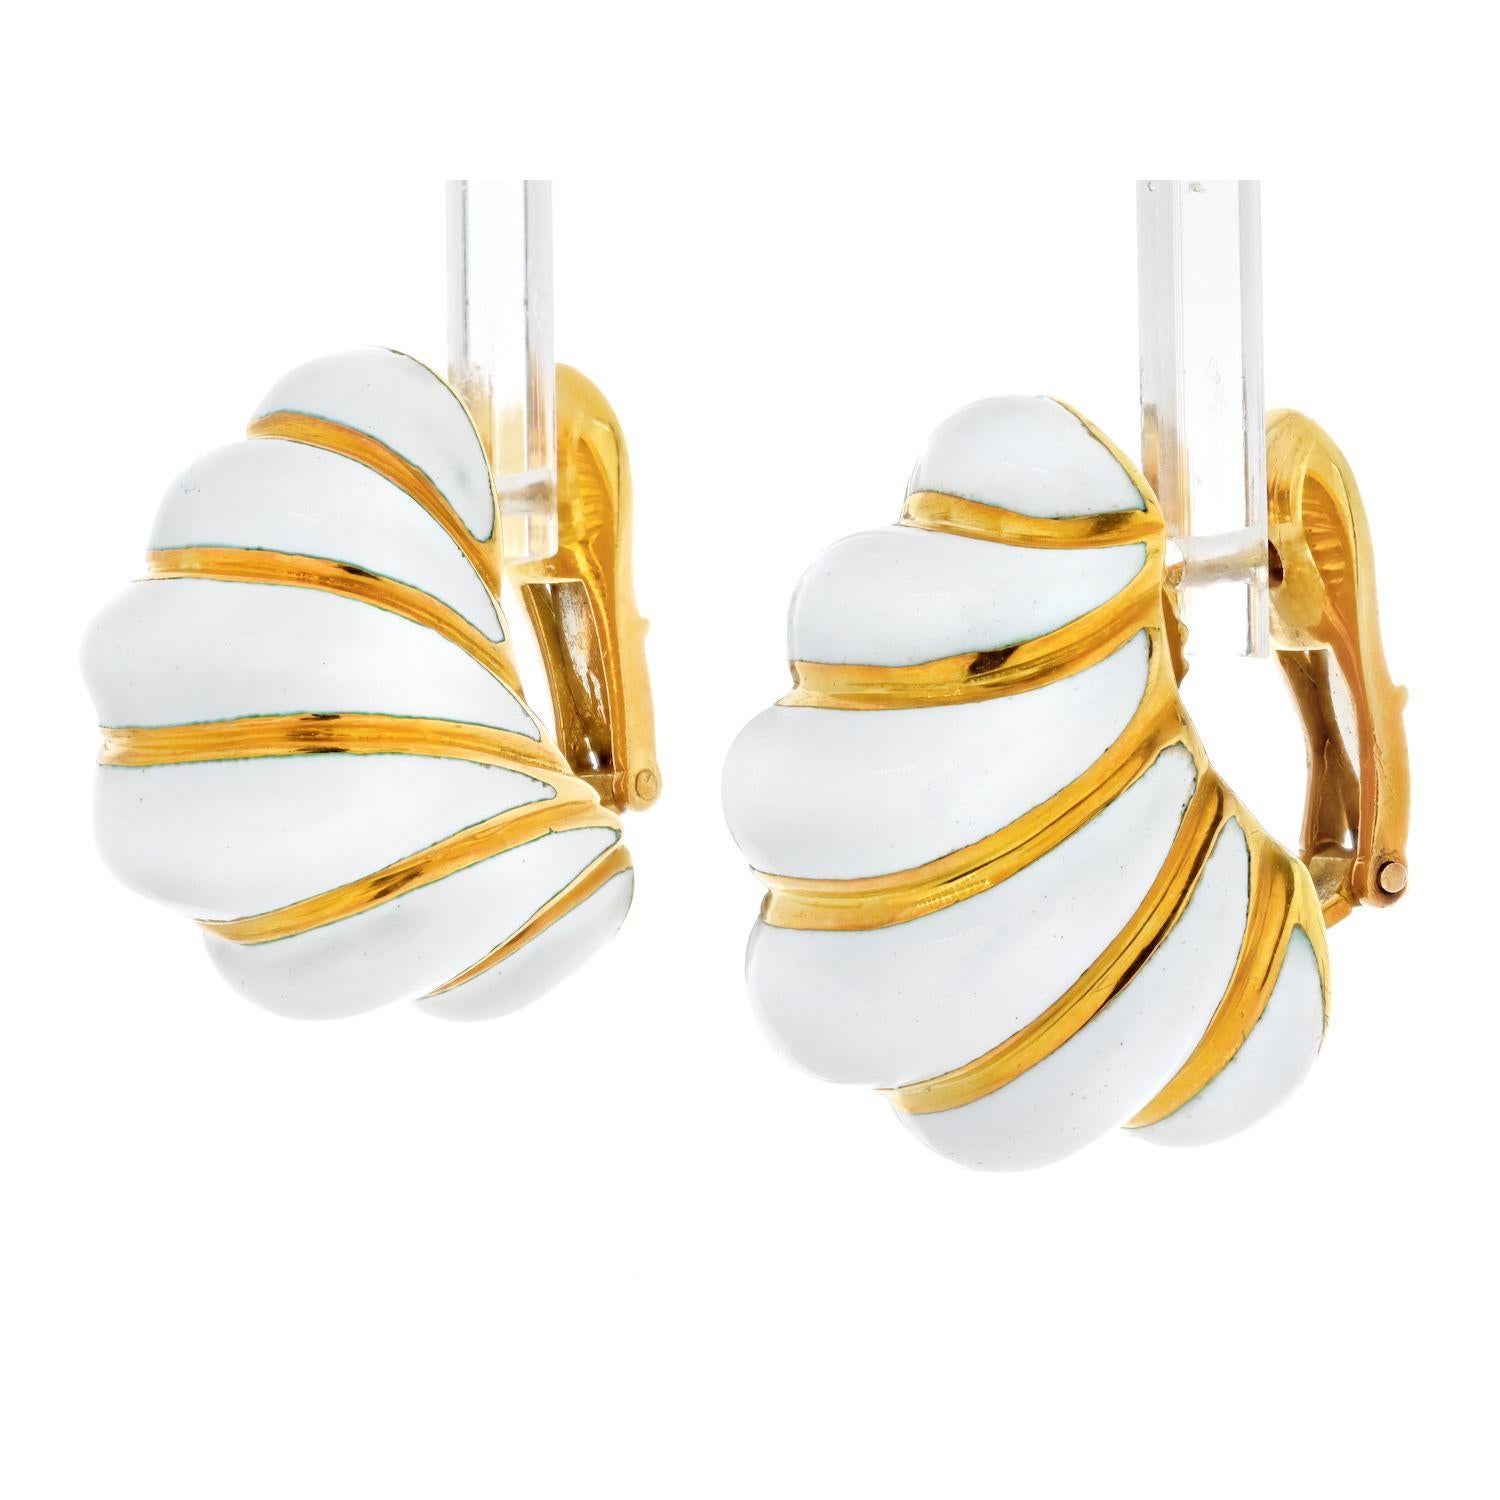 This stylish pair of 18K Gold Croissant Fluted White Enamel Earrings by David Webb can be worn every day or with a formal outfit. These earrings are a perfect gift for someone who loves estate jewelry and perhaps owns a white enamel ring by the